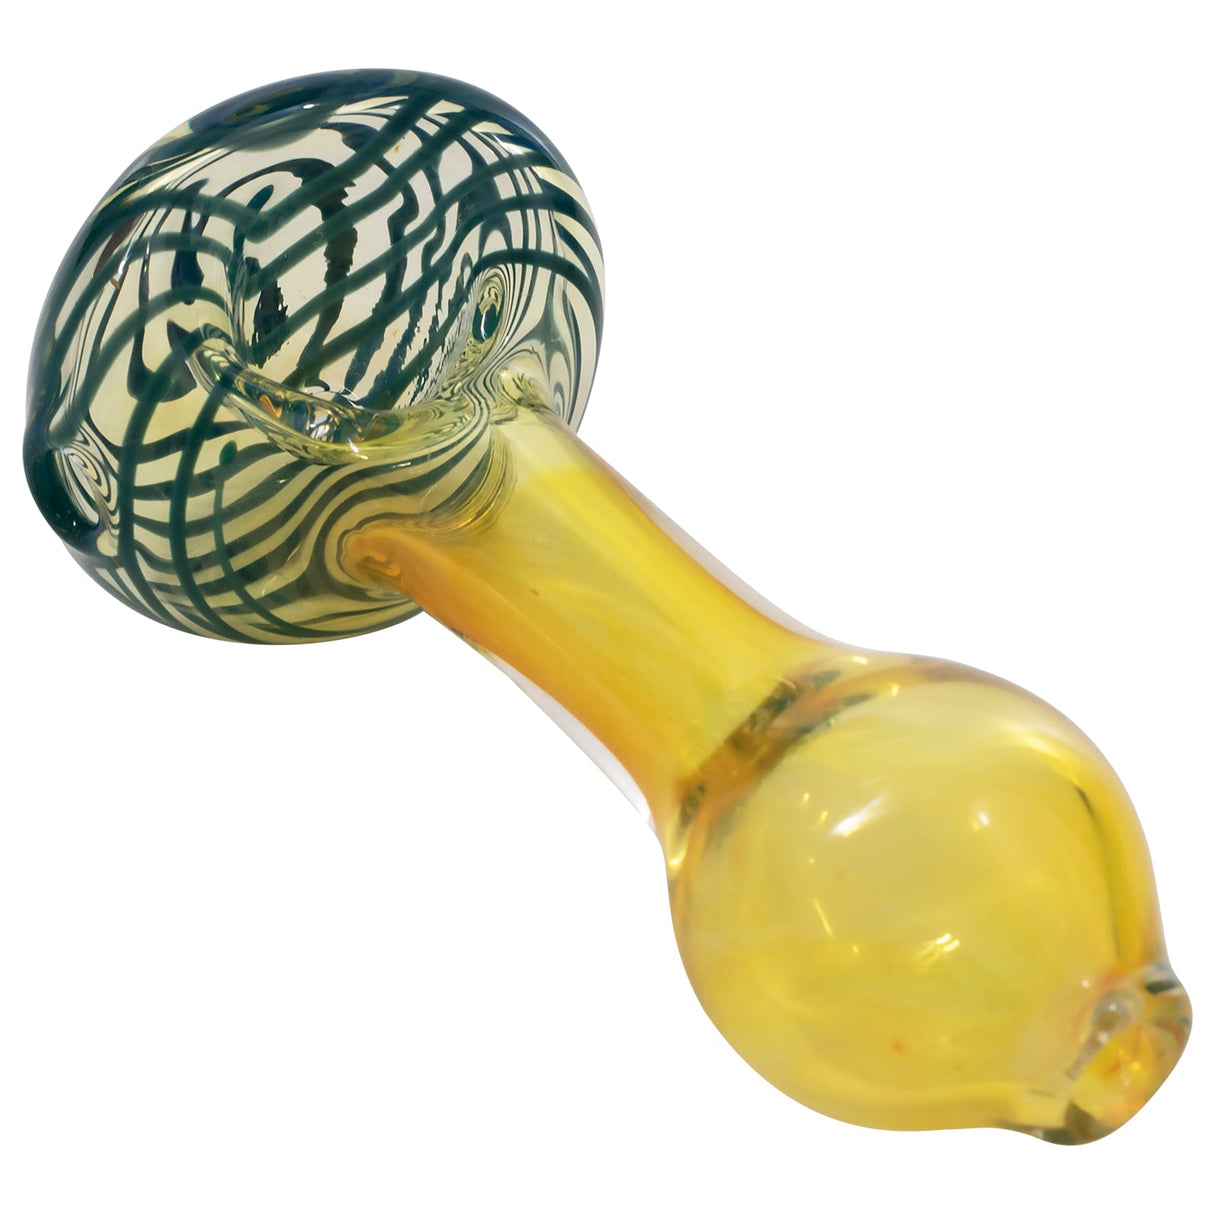 LA Pipes Spiral-Head Color Changing Glass Spoon Pipe, Teal Variant, 3.5" Length, USA Made